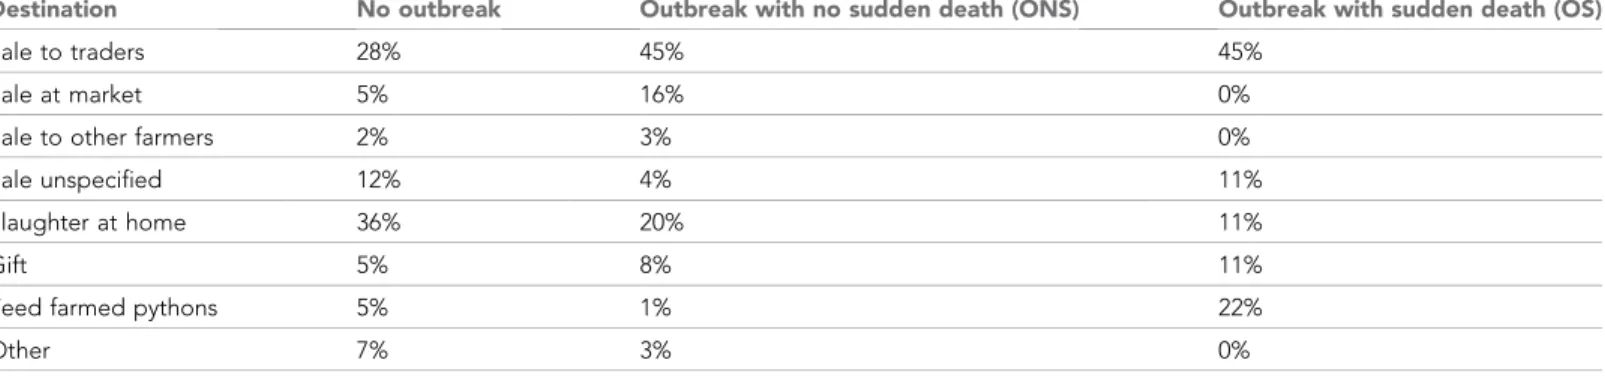 Table 3. The destination of harvested broiler chicken flocks with or without occurrence of outbreaks of disease-induced mortality in chickens of the same farm in the same month or one month prior (%).